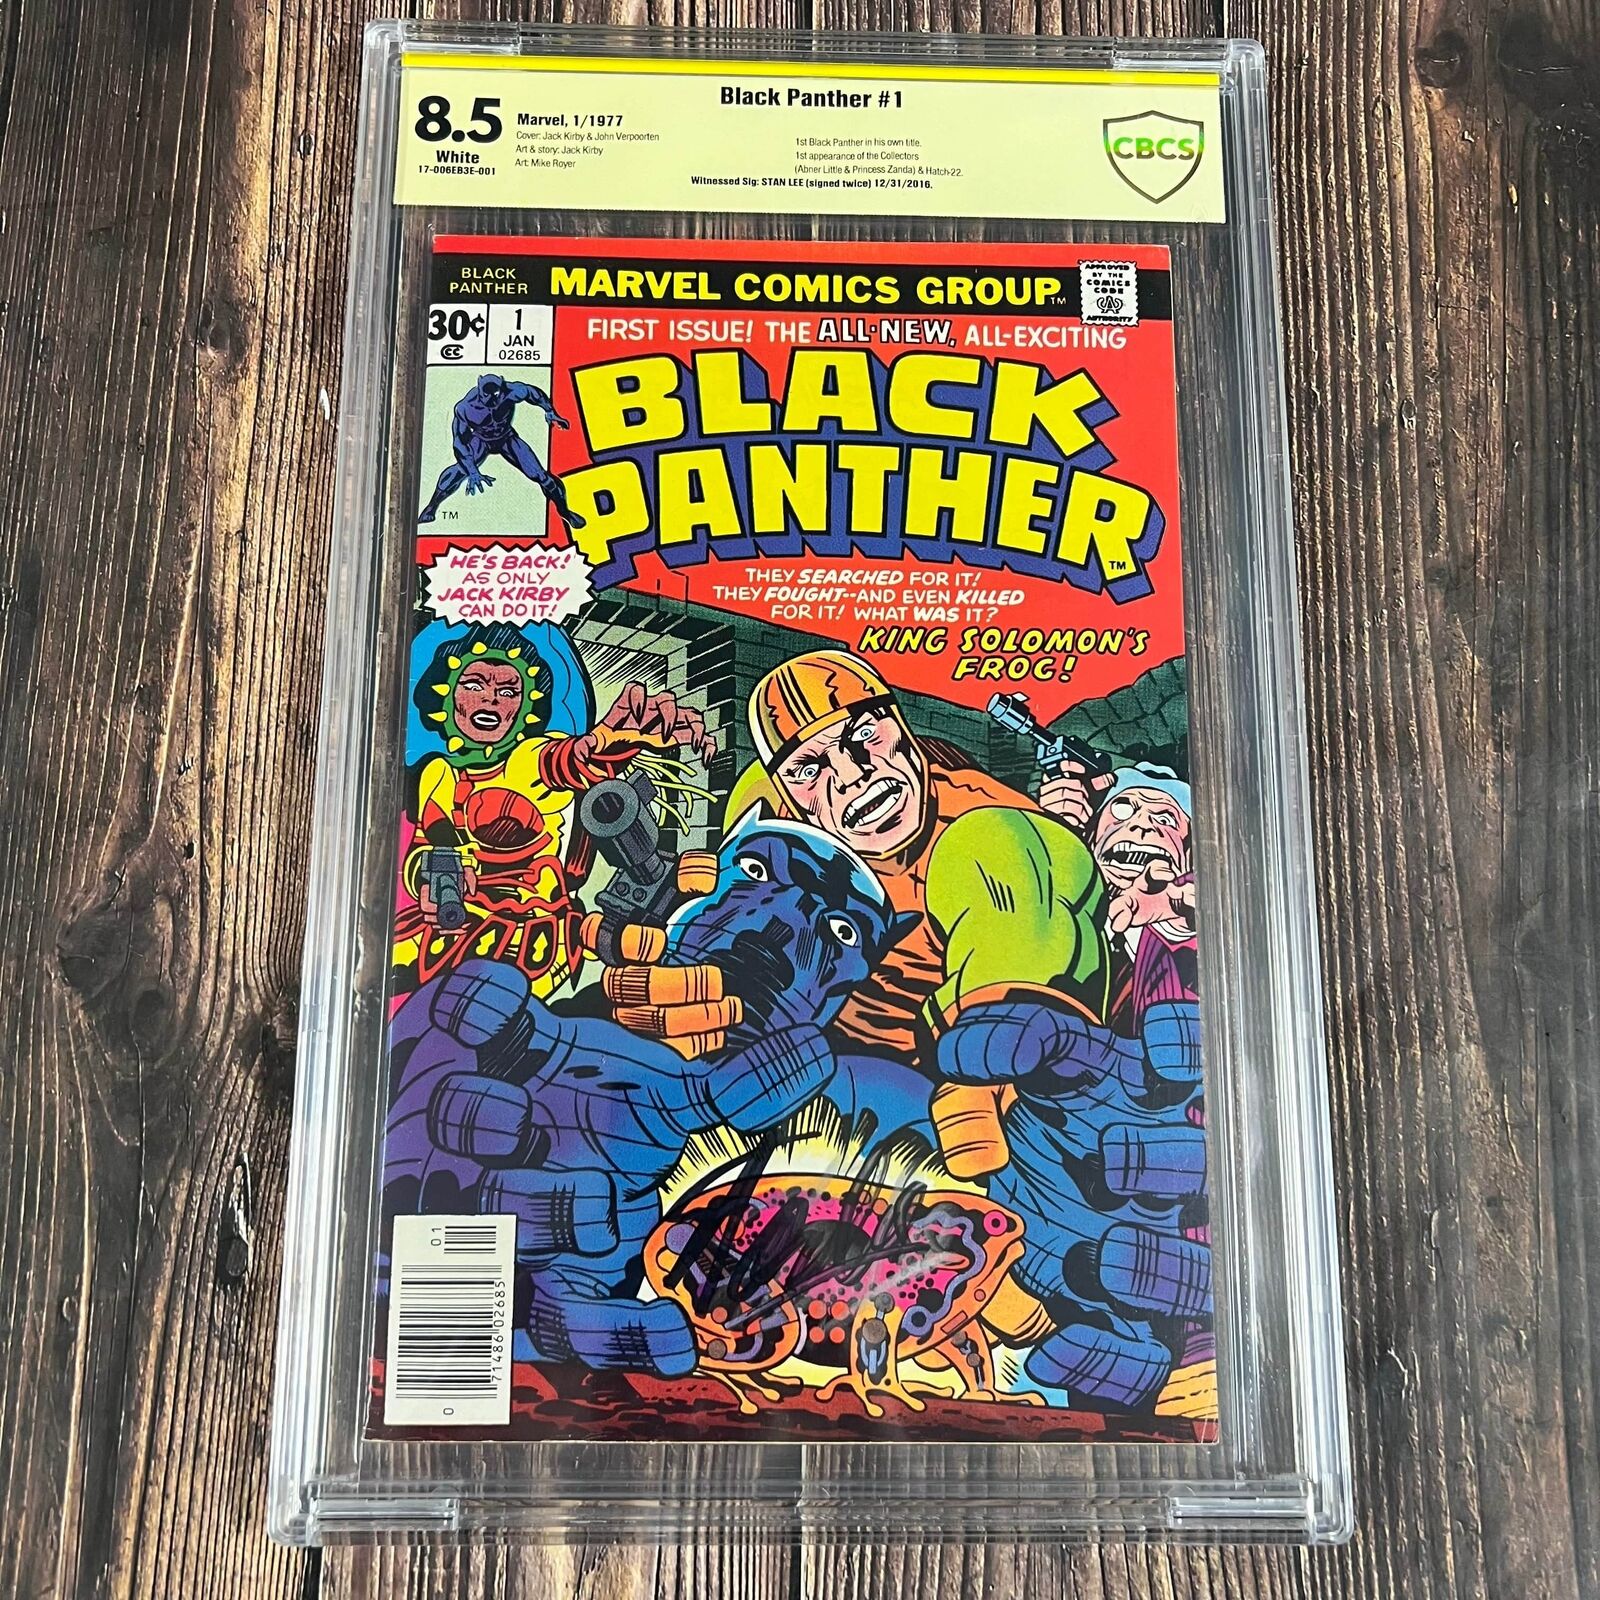 Black Panther #1 CBCS 8.5 x2 Signed by Stan Lee